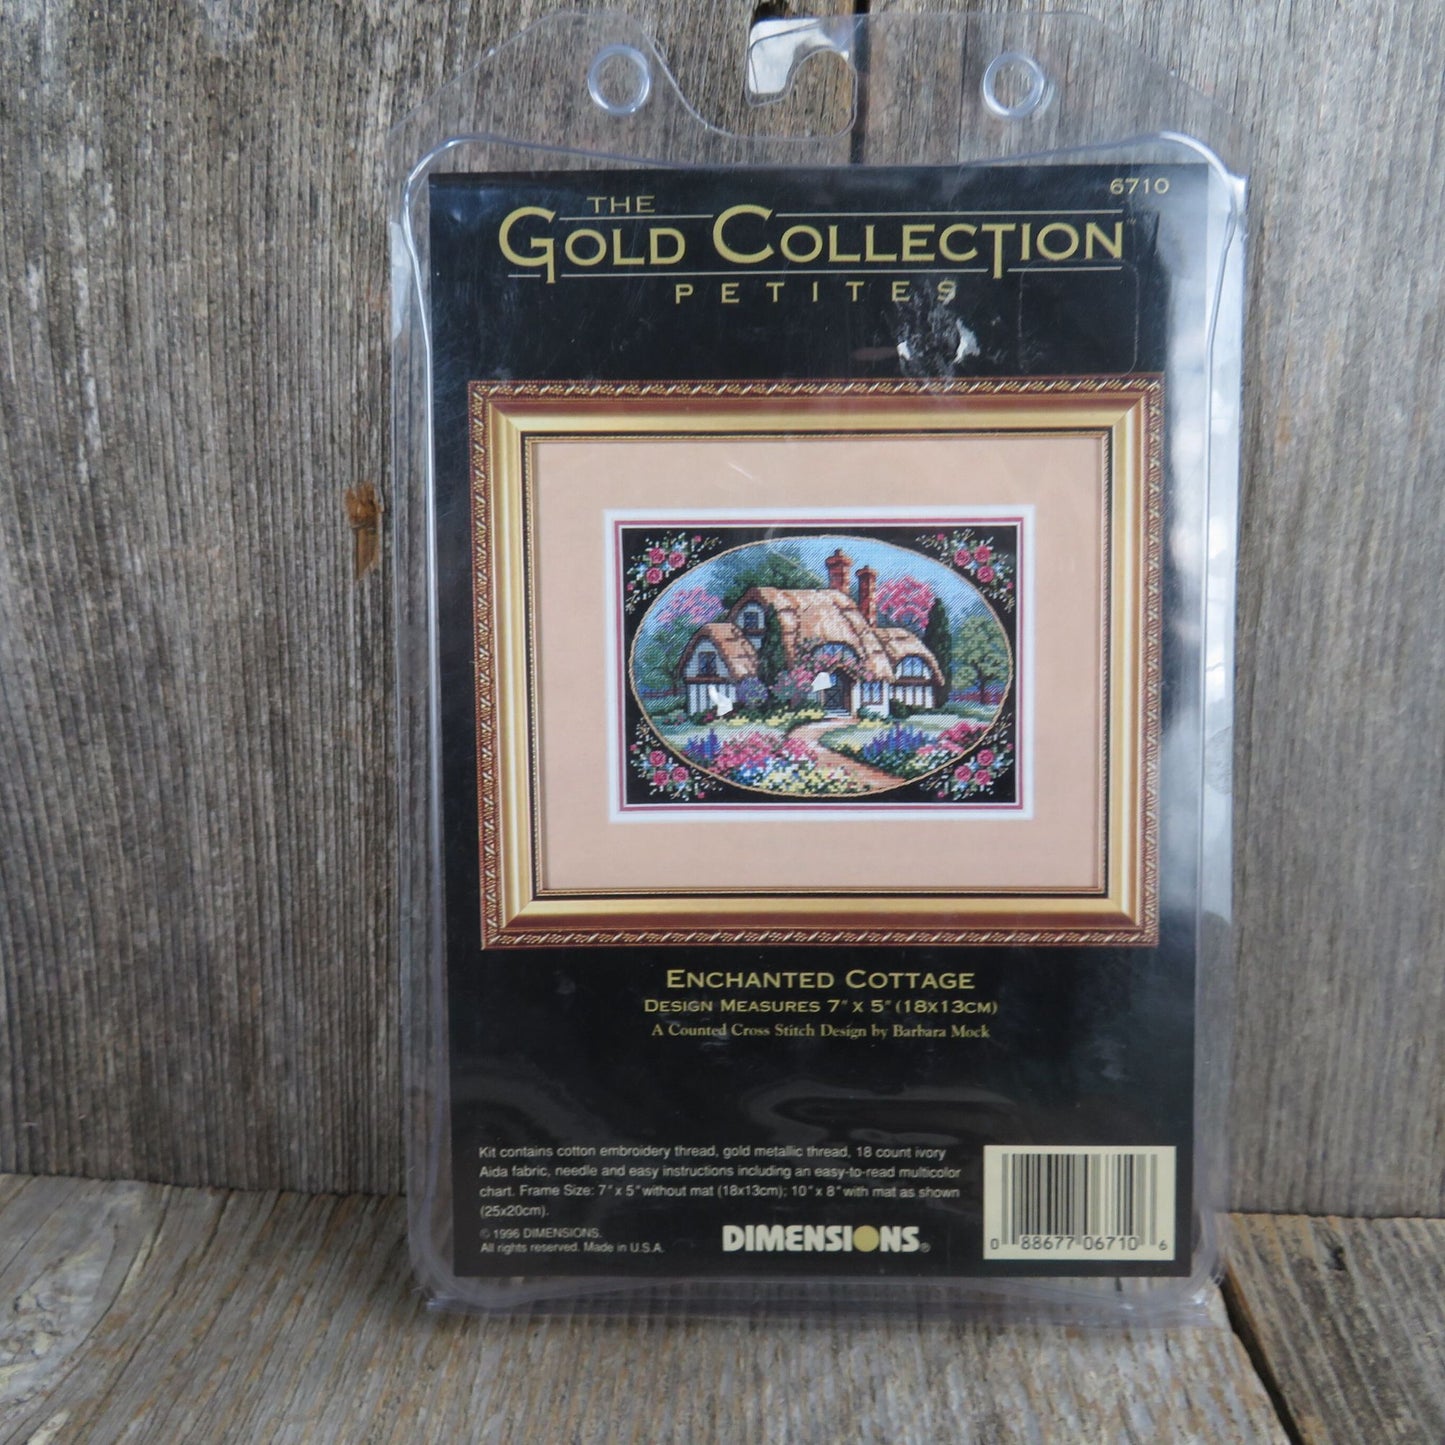 Enchanted Cottage Counted Cross Stitch Kit Dimensions Gold Collection Craft 6710